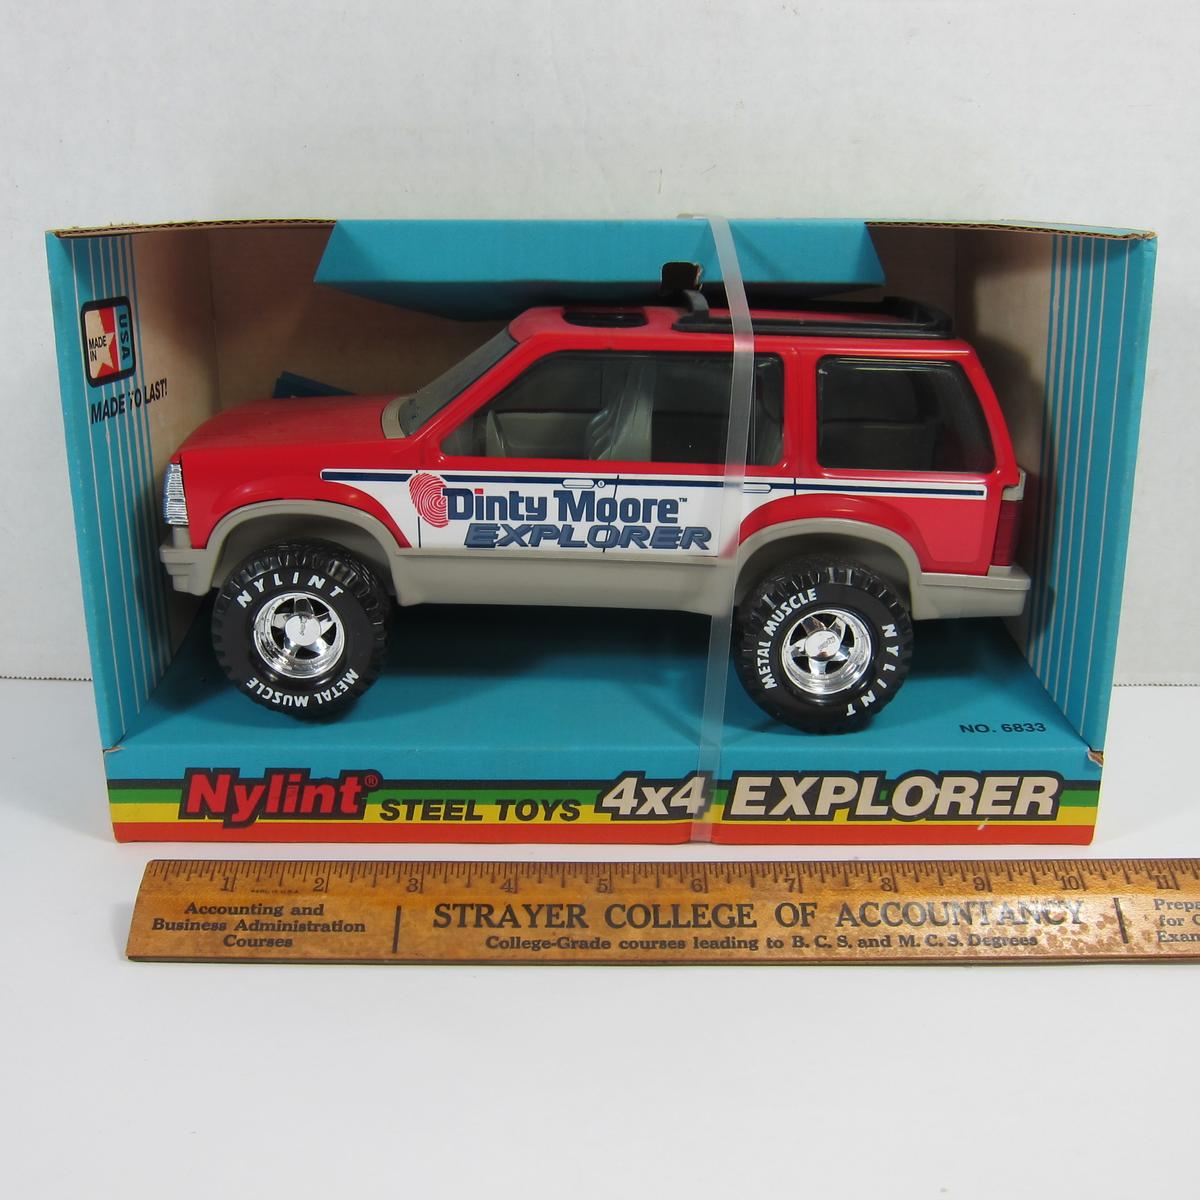 Dinty Moore 4x4 Explorer Nylint Steel Toy Truck